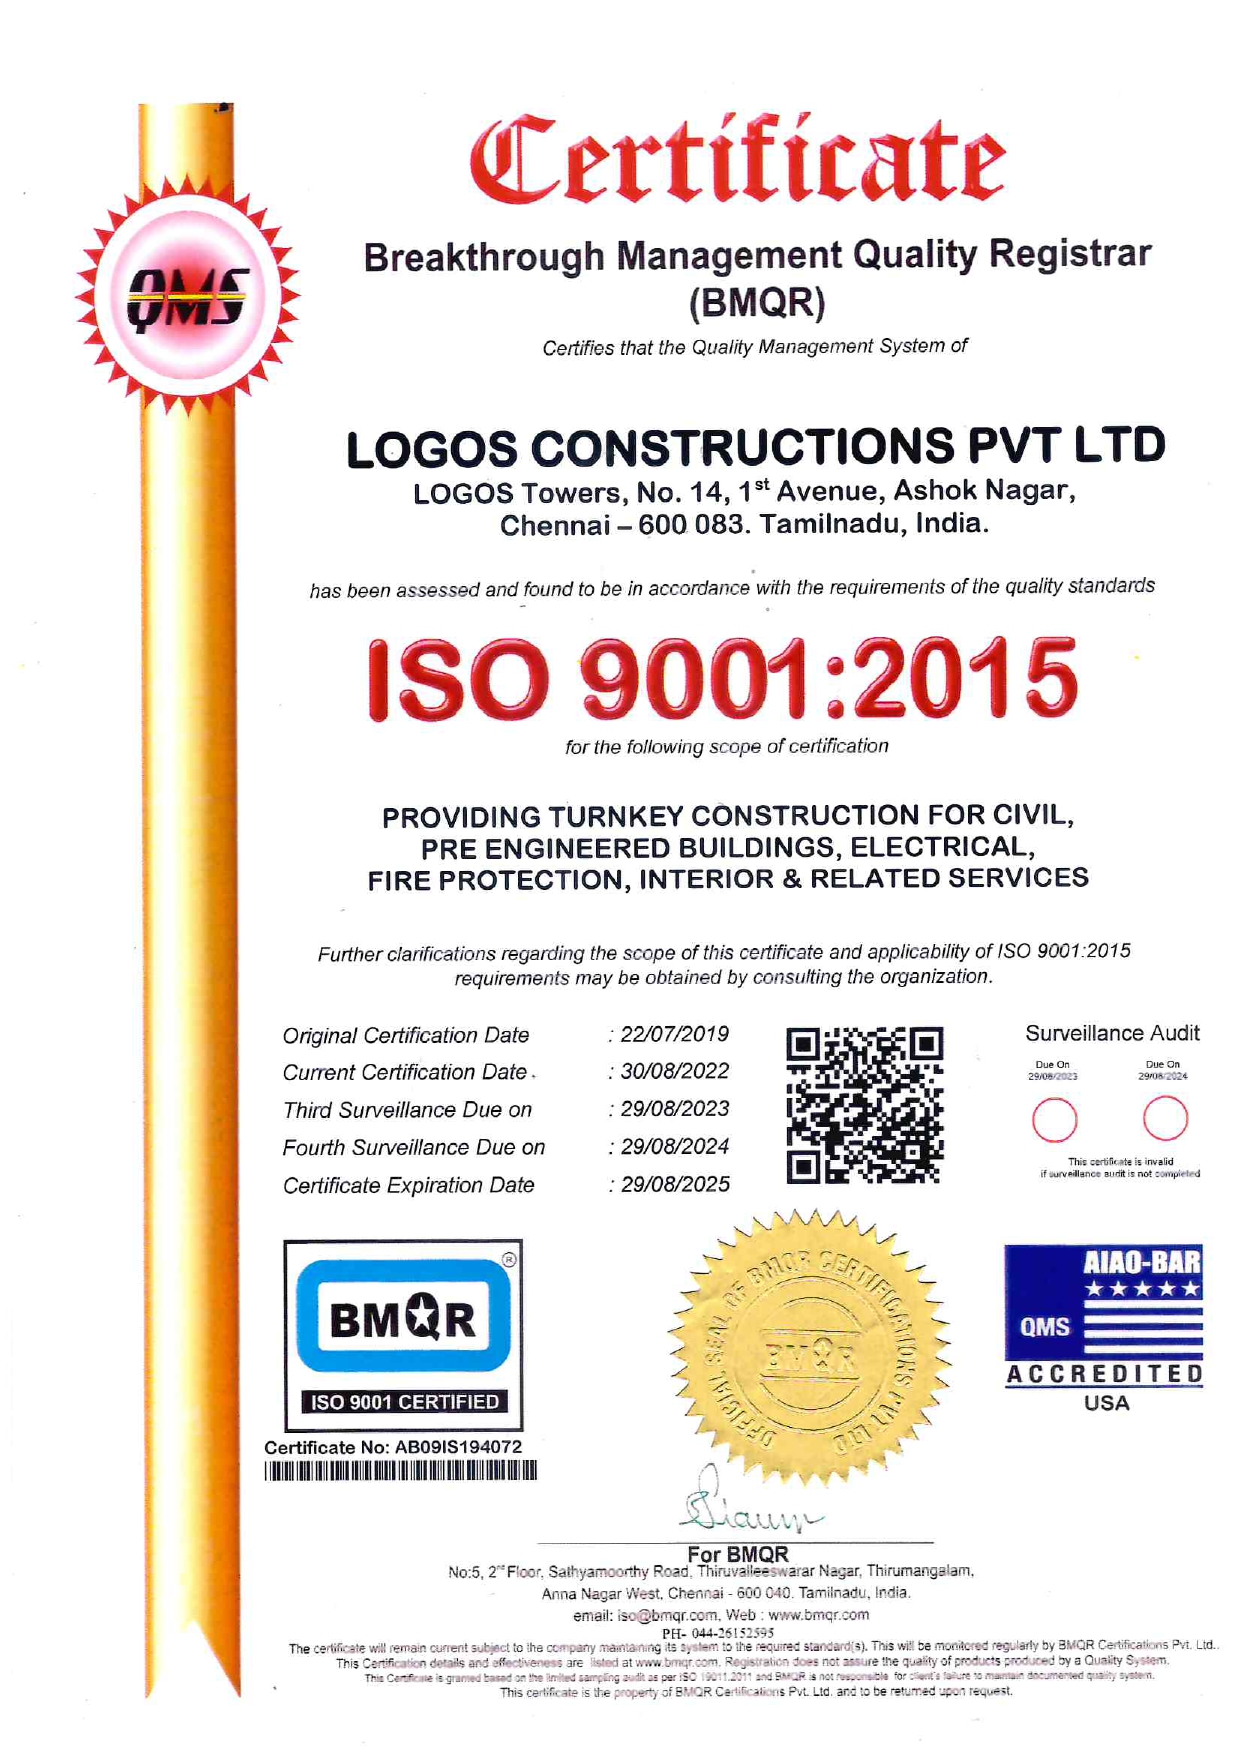 ISO9001 Certification Logos Constructions